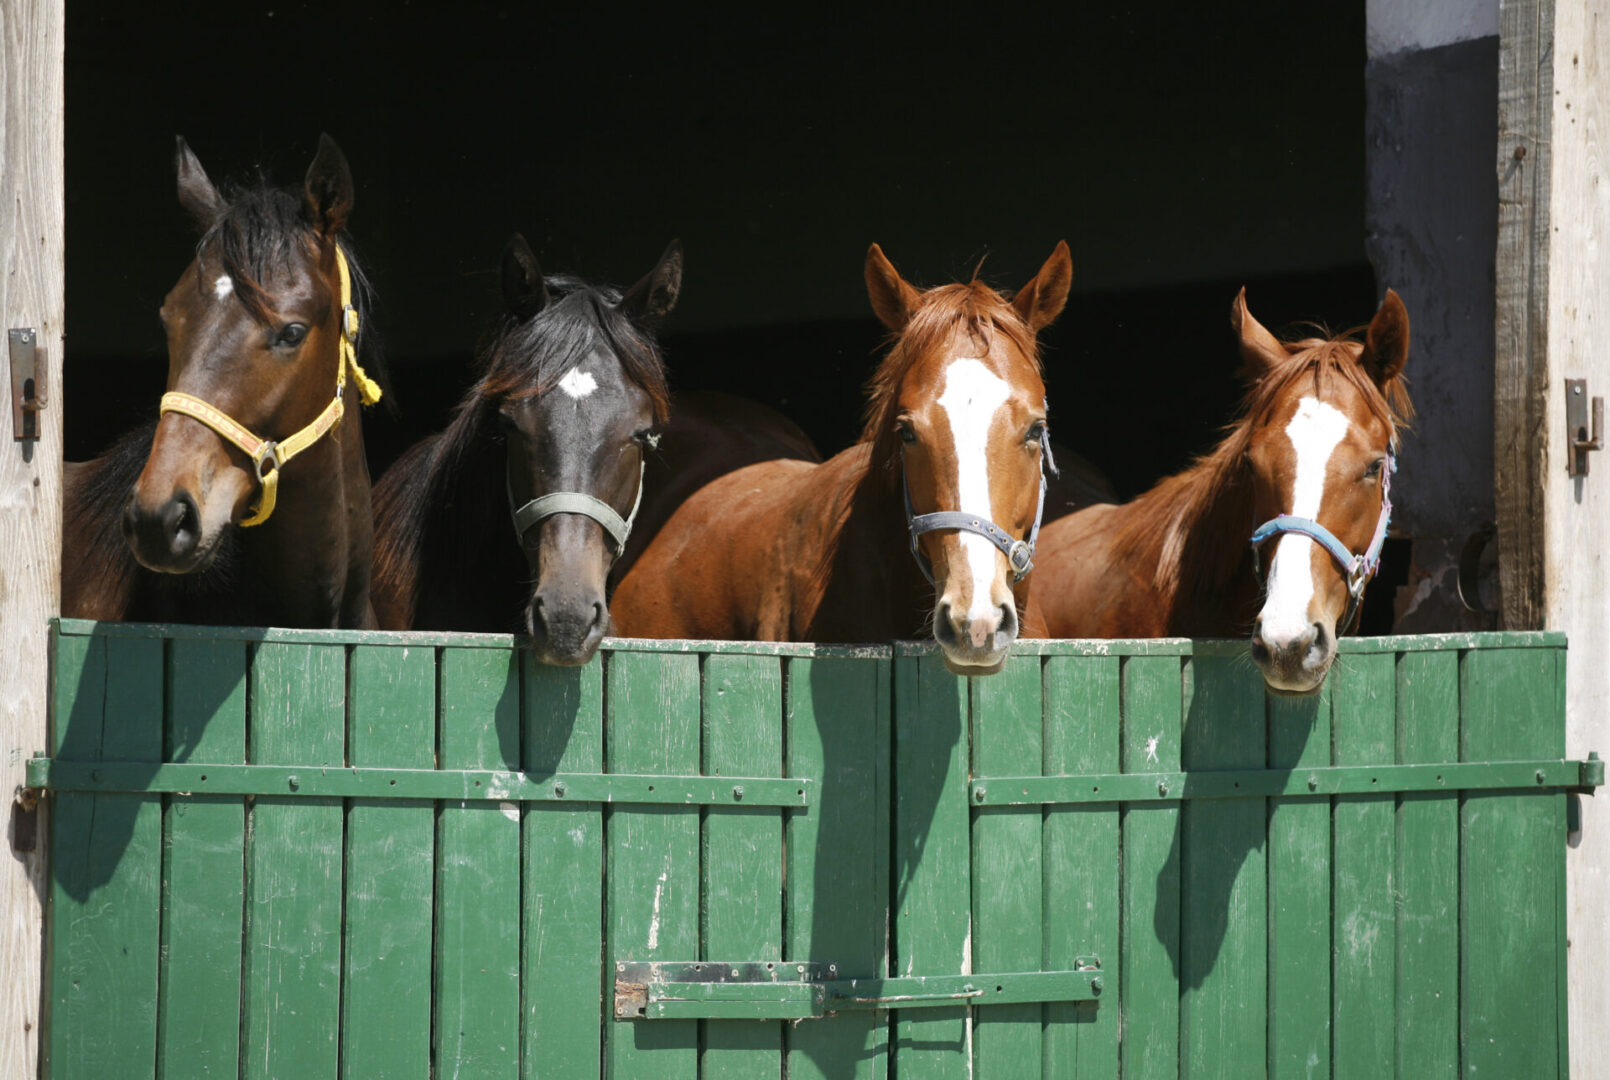 Four horses are standing in a row behind the fence.